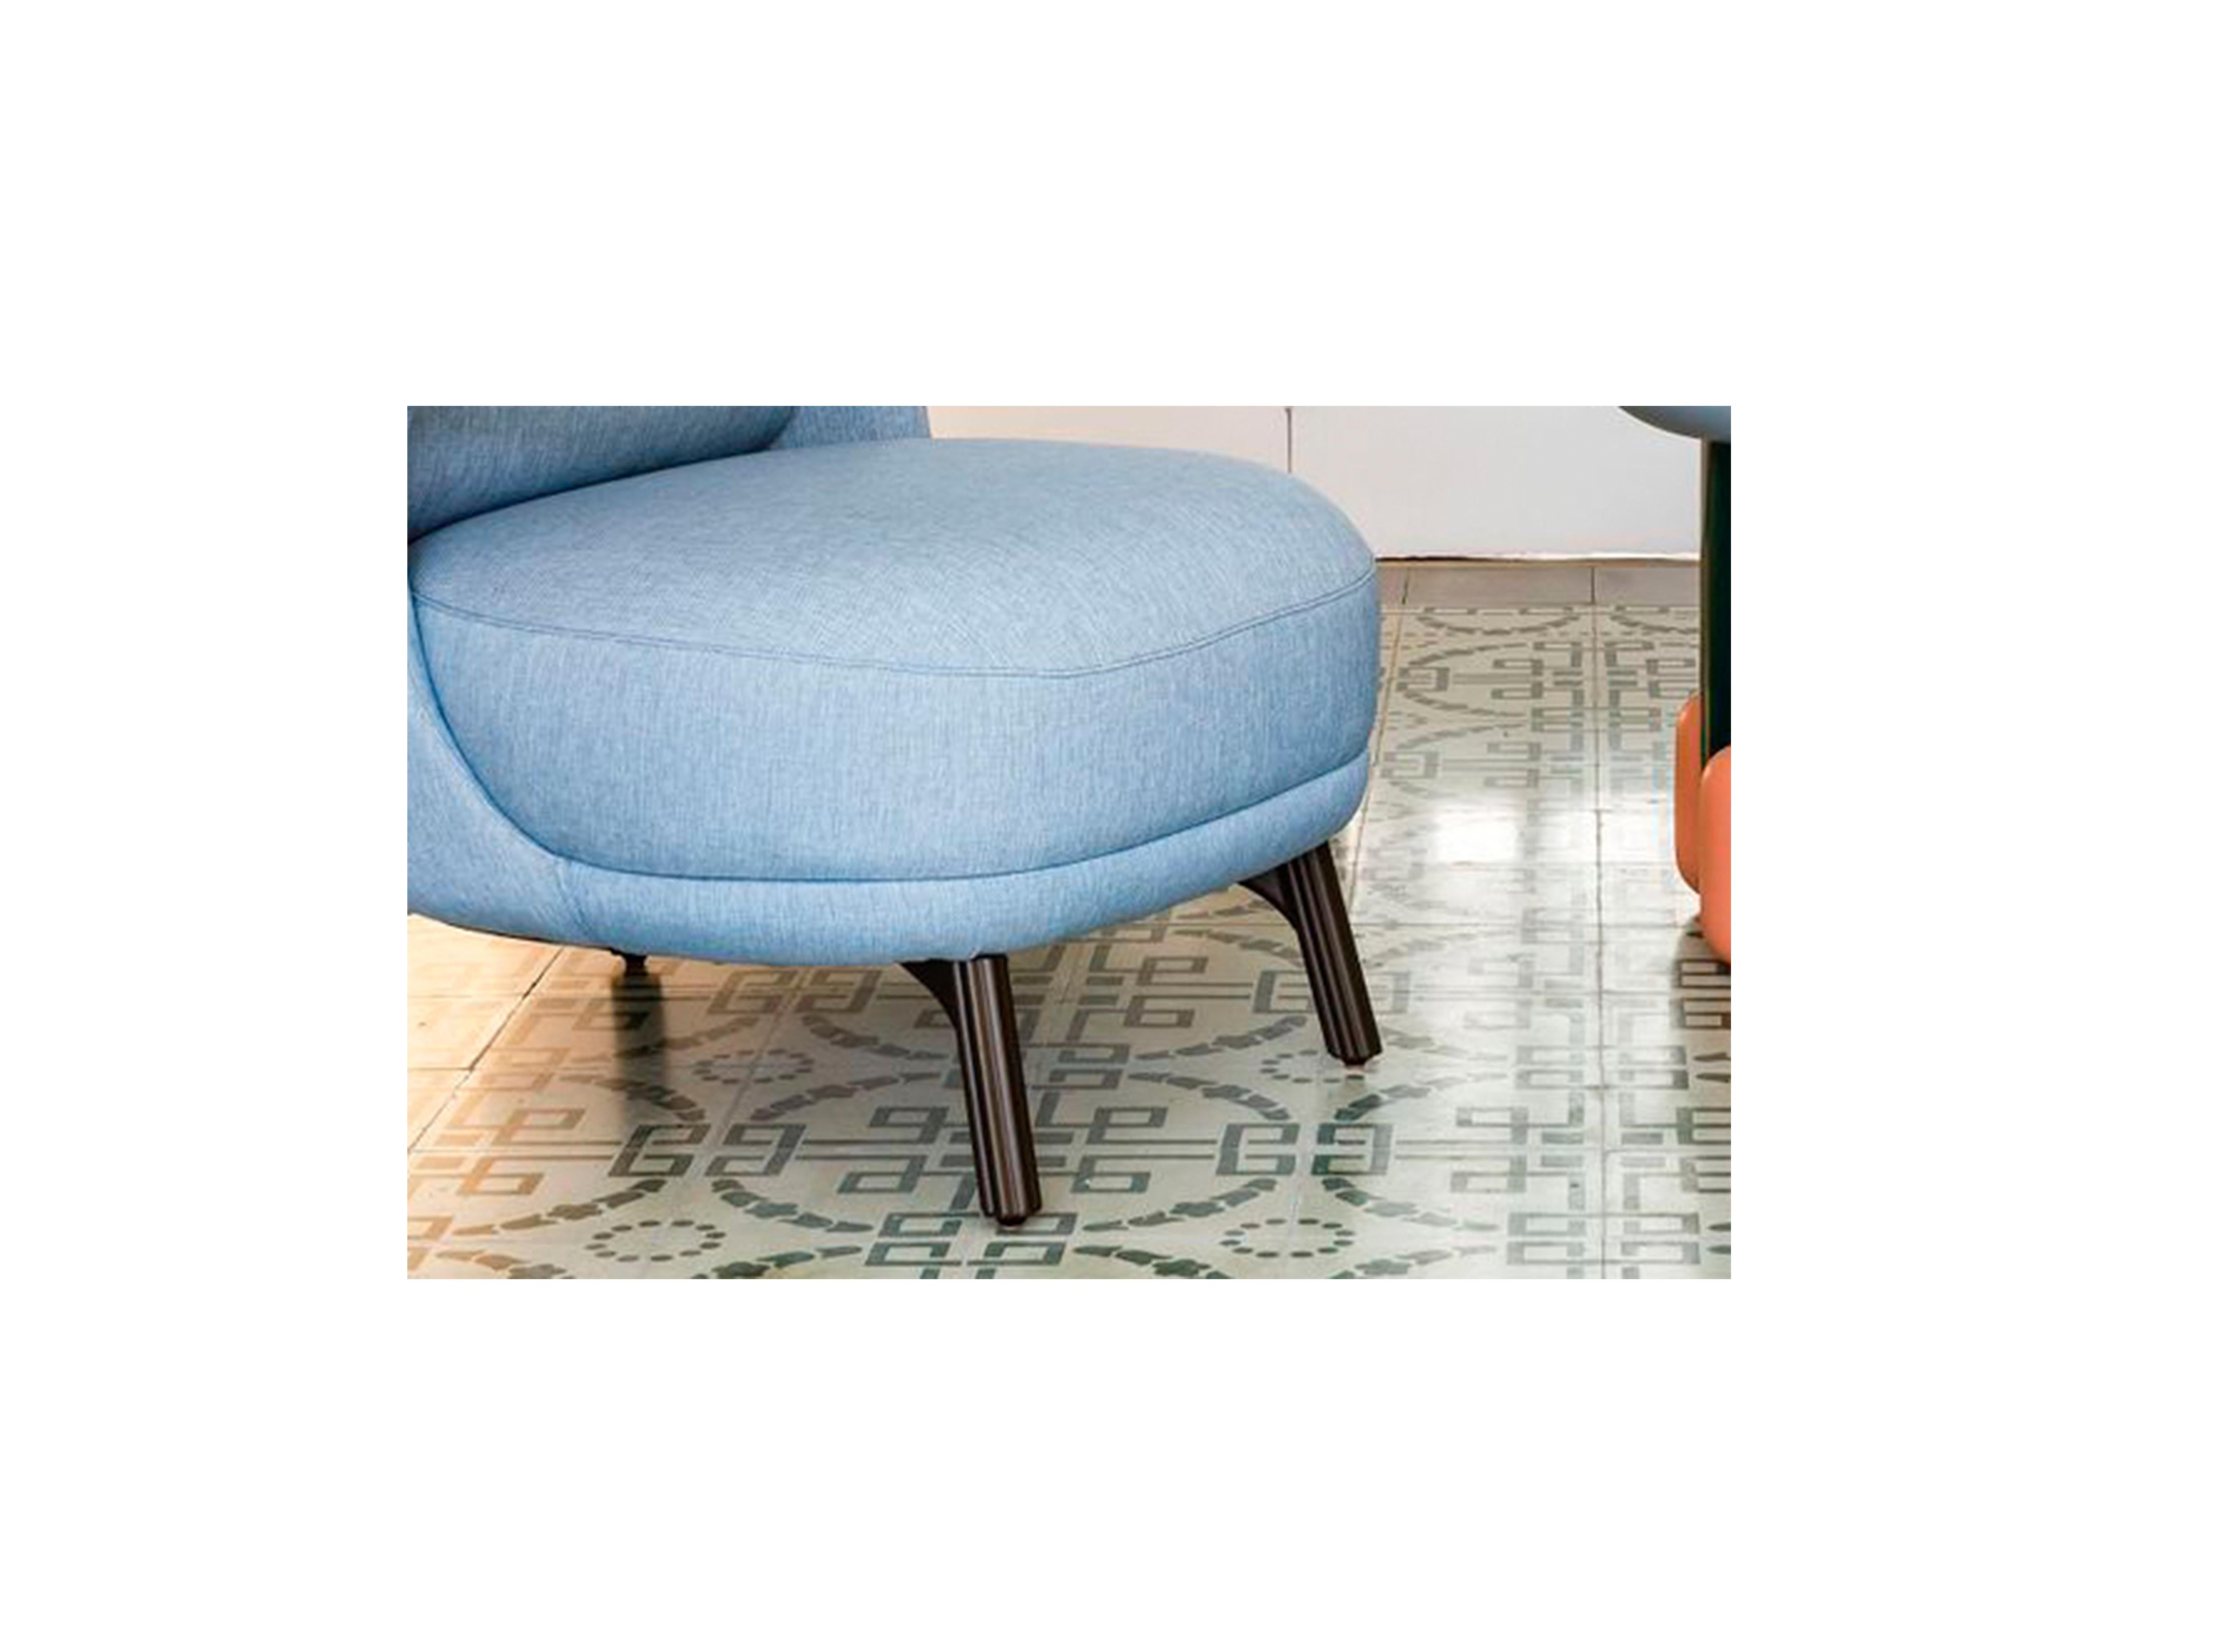 Jaime Hayon, Contemporary, Monocolor in Blue Fabric Upholstery Dino Armchair In New Condition For Sale In Barcelona, Barcelona